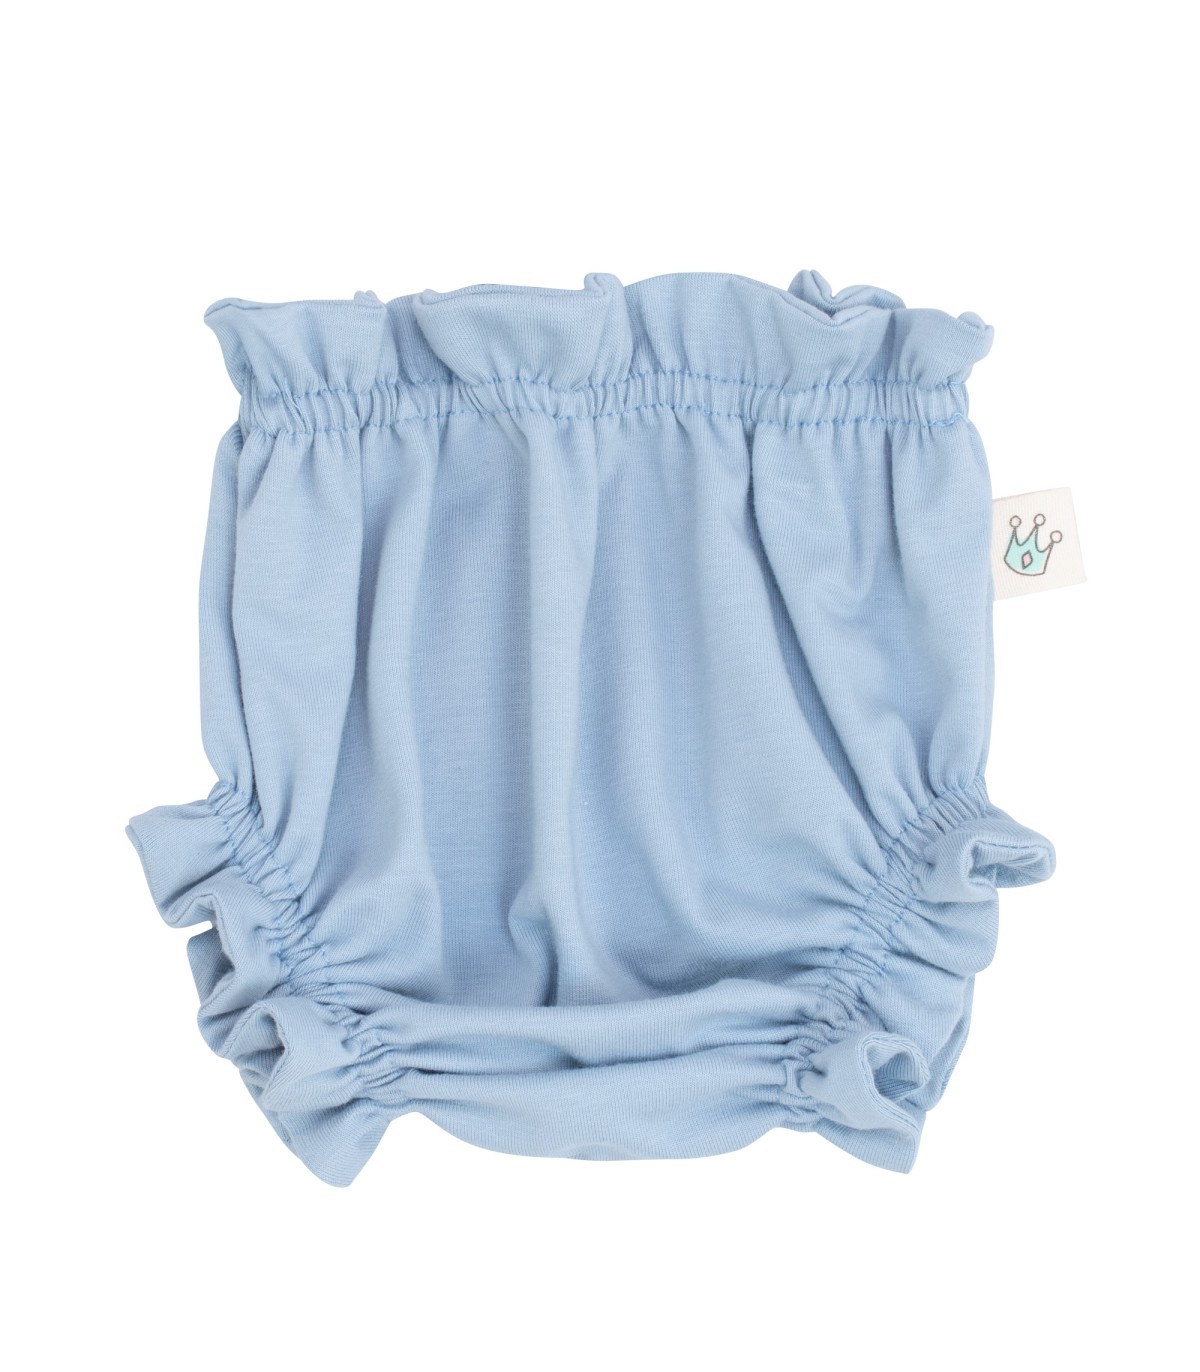 Culotte Baby Blue - Front view